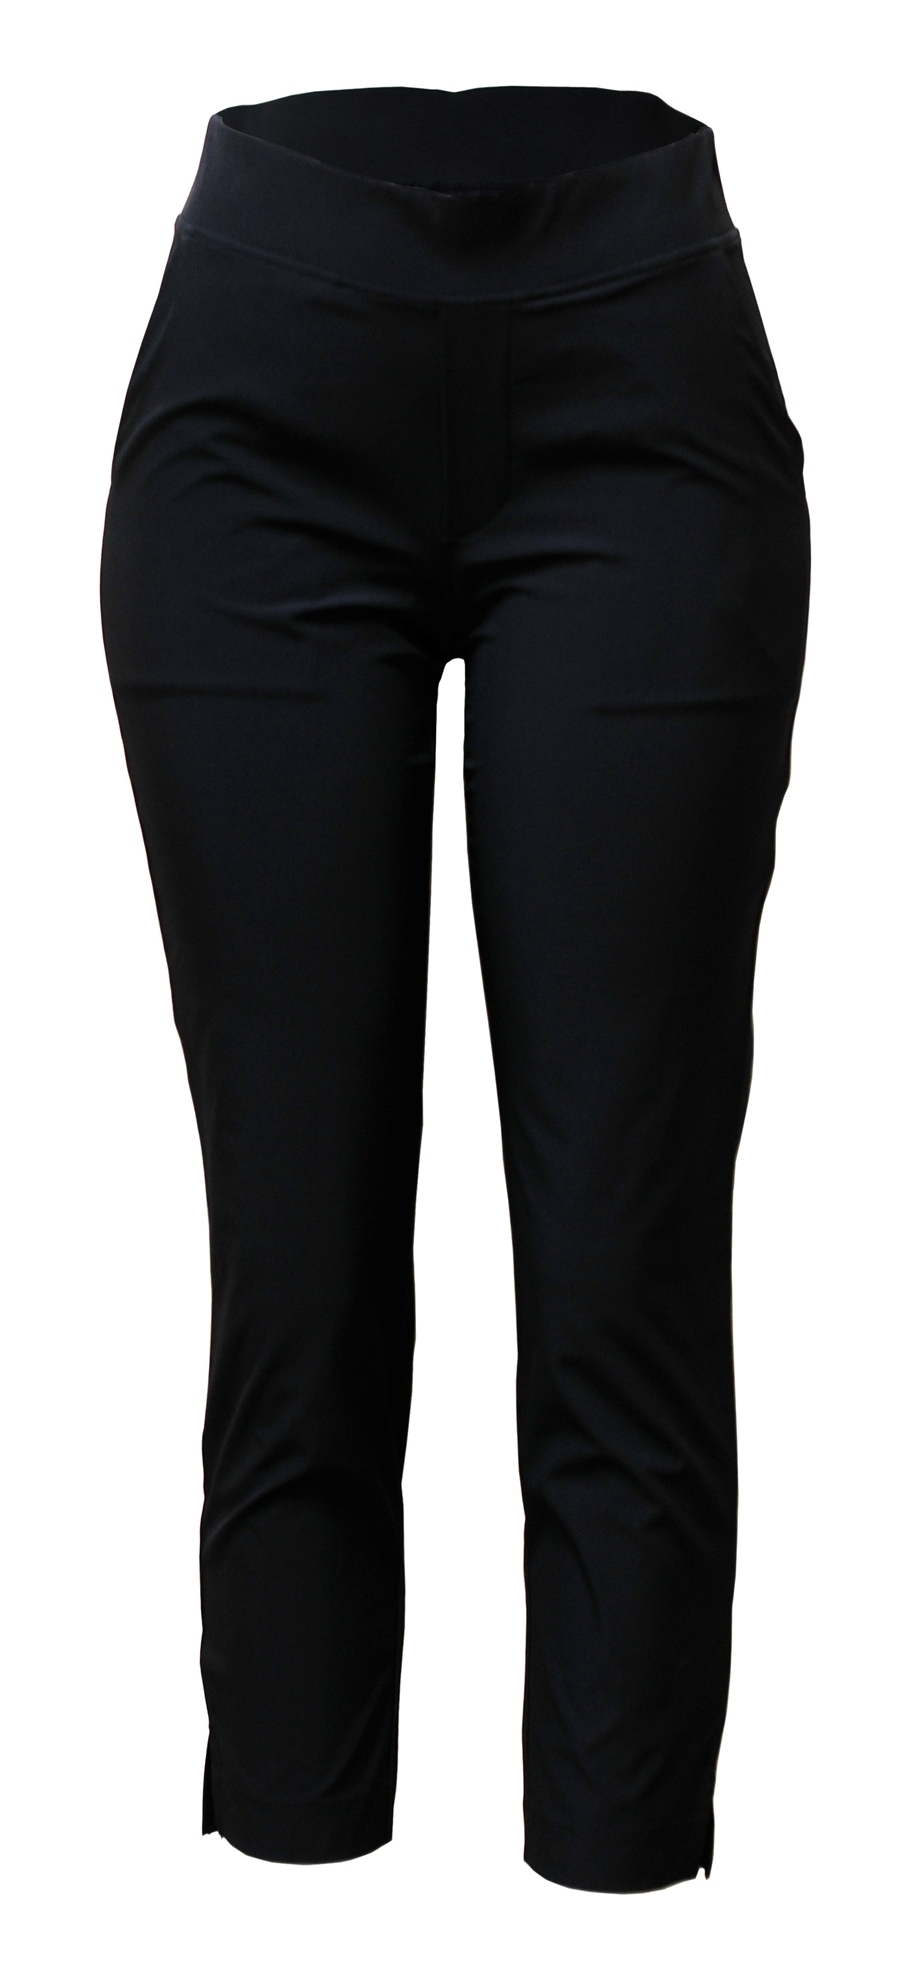 BAW Athletic Wear WP51 - Ladies Woven Pant